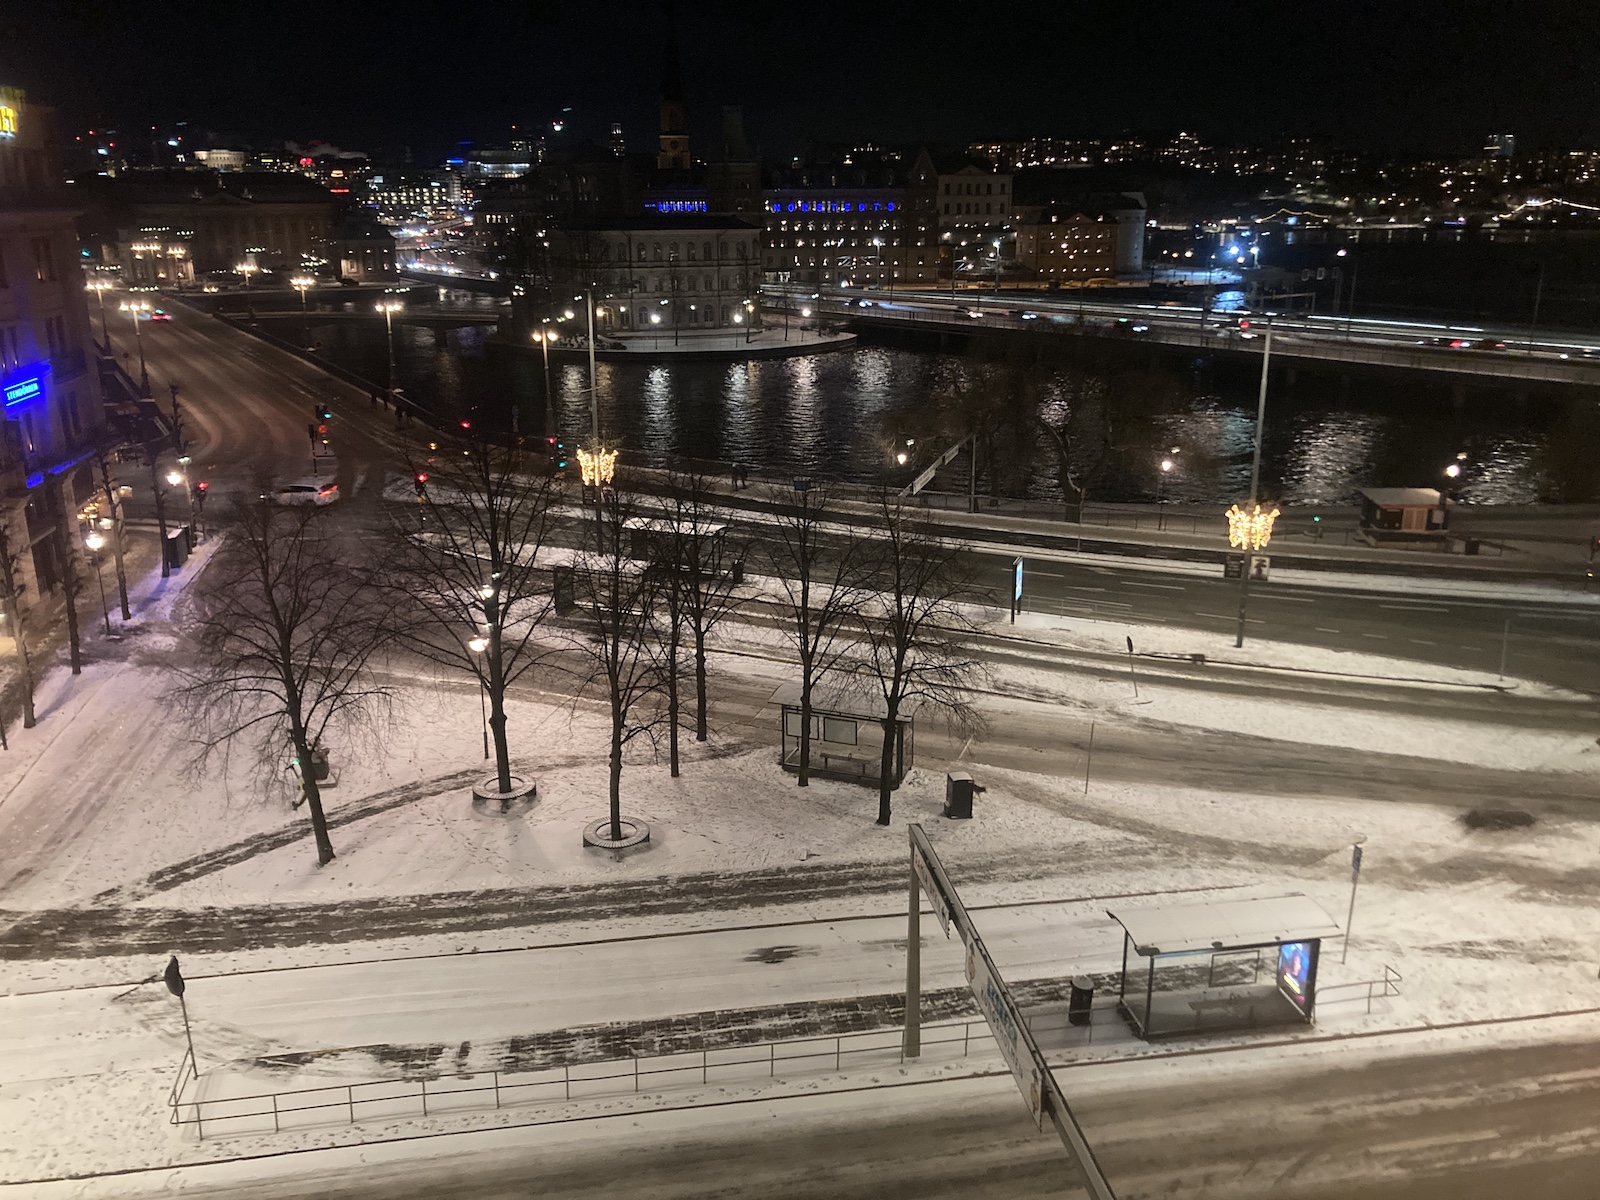 Image of the view from our hotel room at the Sheraton Stockholm, which is part of my hotel review.